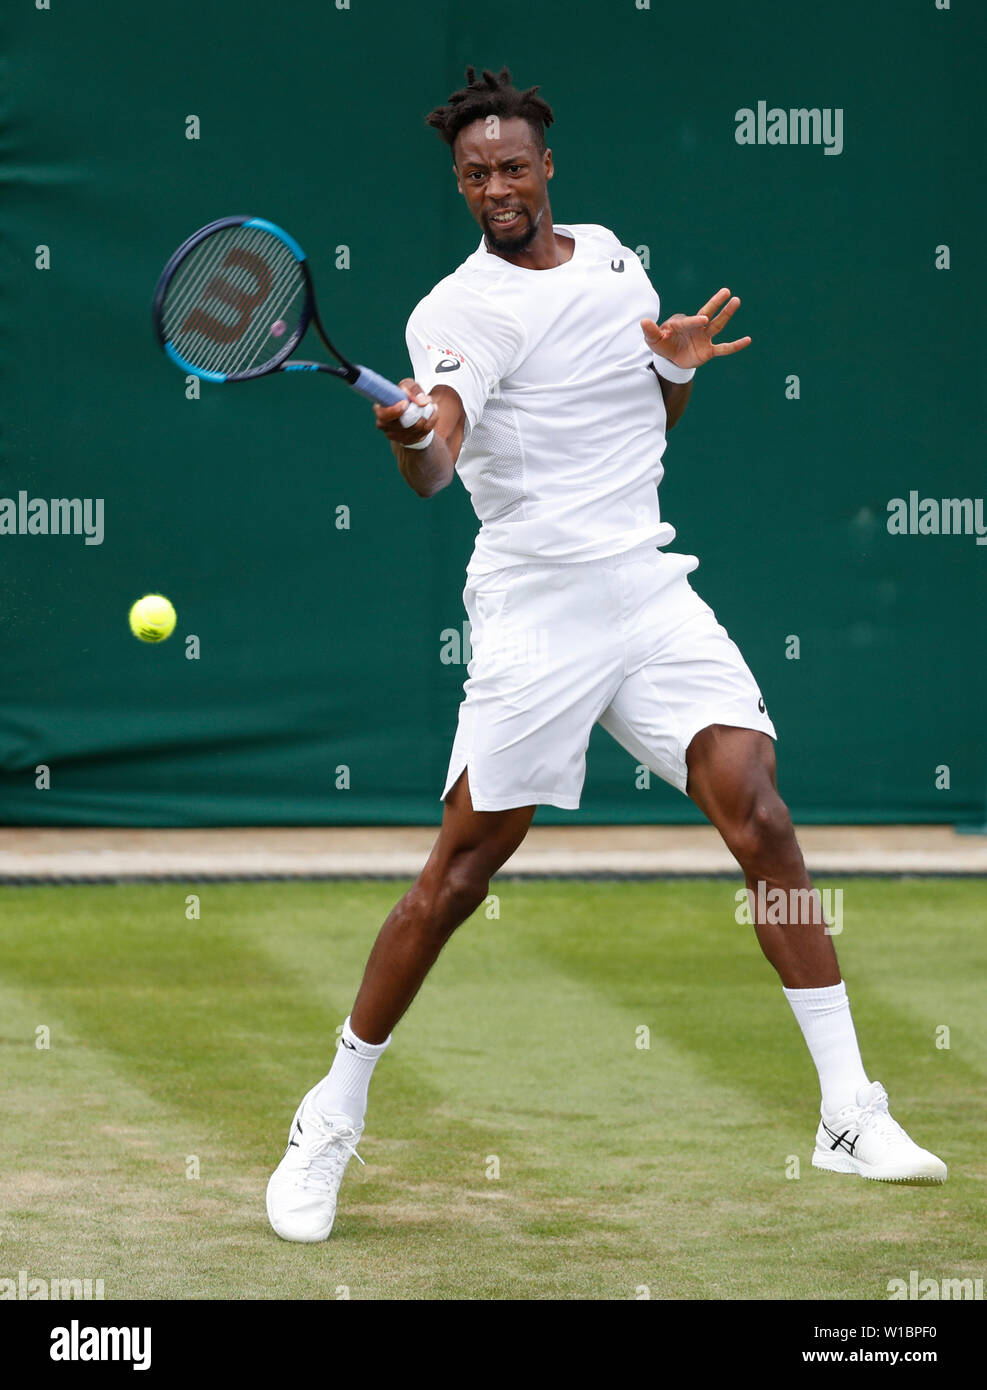 London, Britain. 1st July, 2019. Gael Monfils of France returns a shot  during the men's singles first round match against Ugo Humbert of France at  the 2019 Wimbledon Tennis Championships in London,